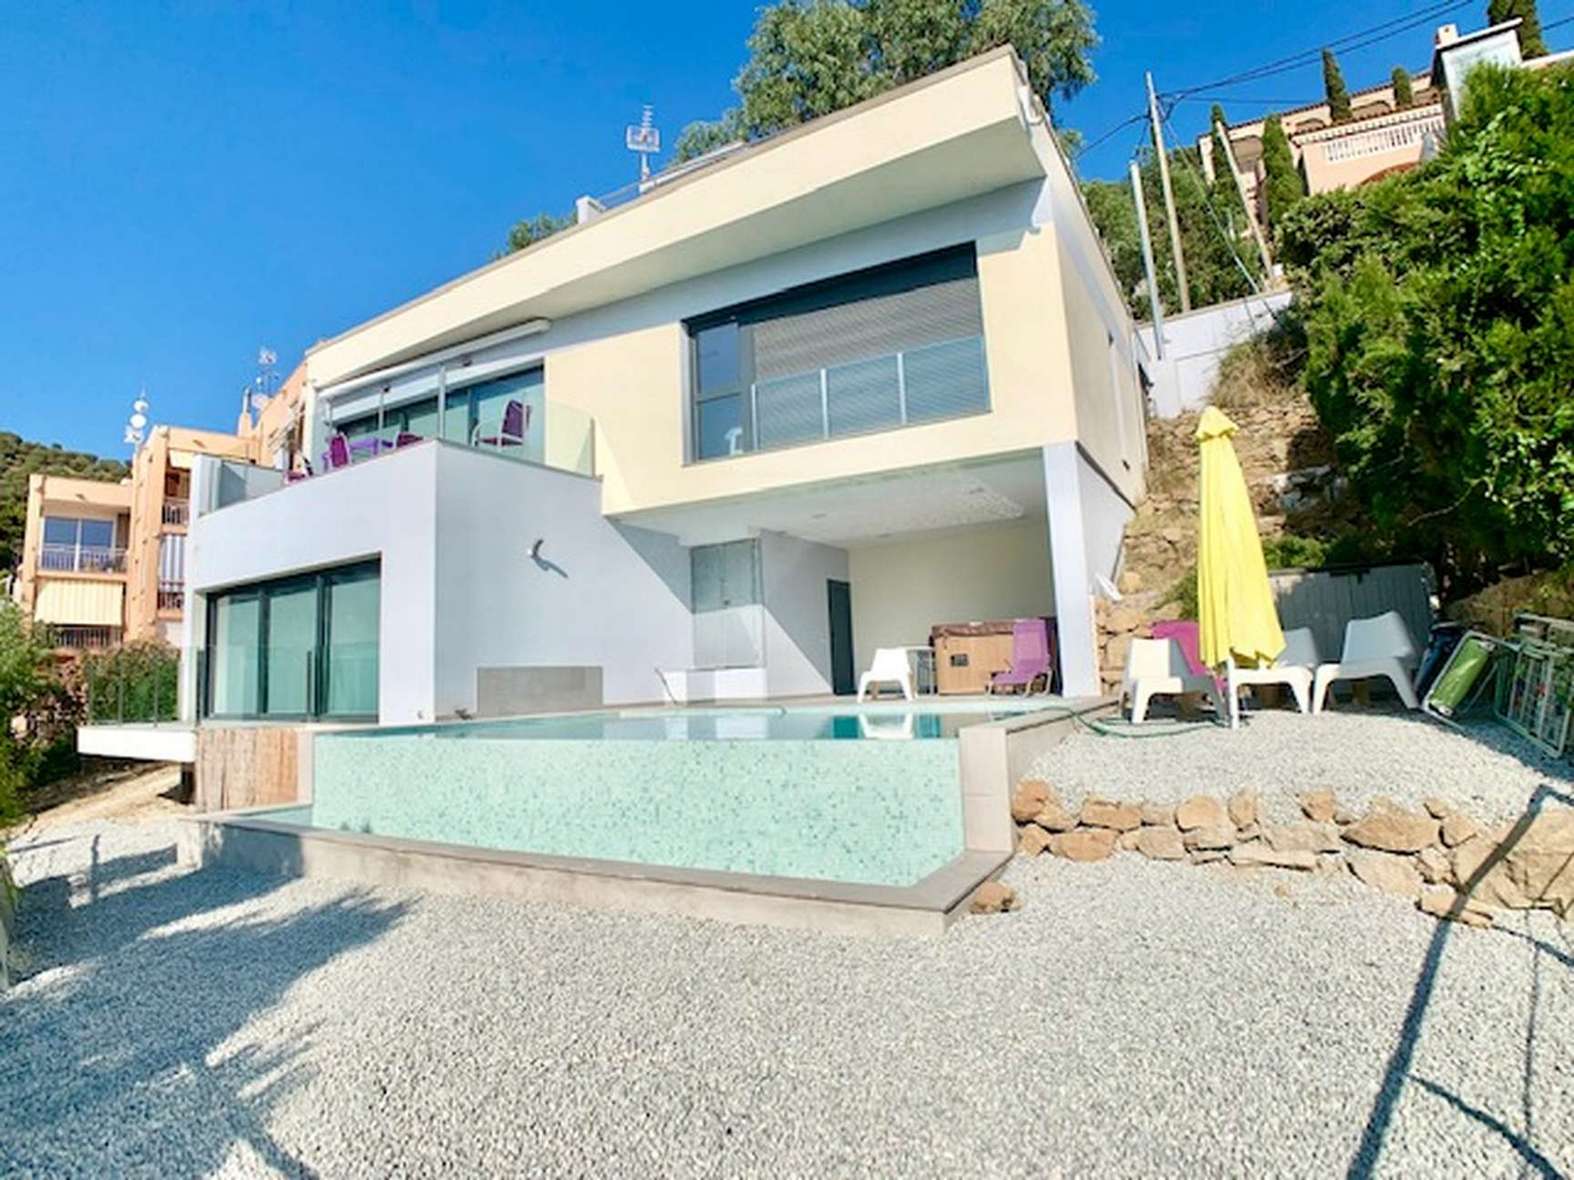 Splendid contemporary villa with sea view, for sale in Rosas - Canyelles